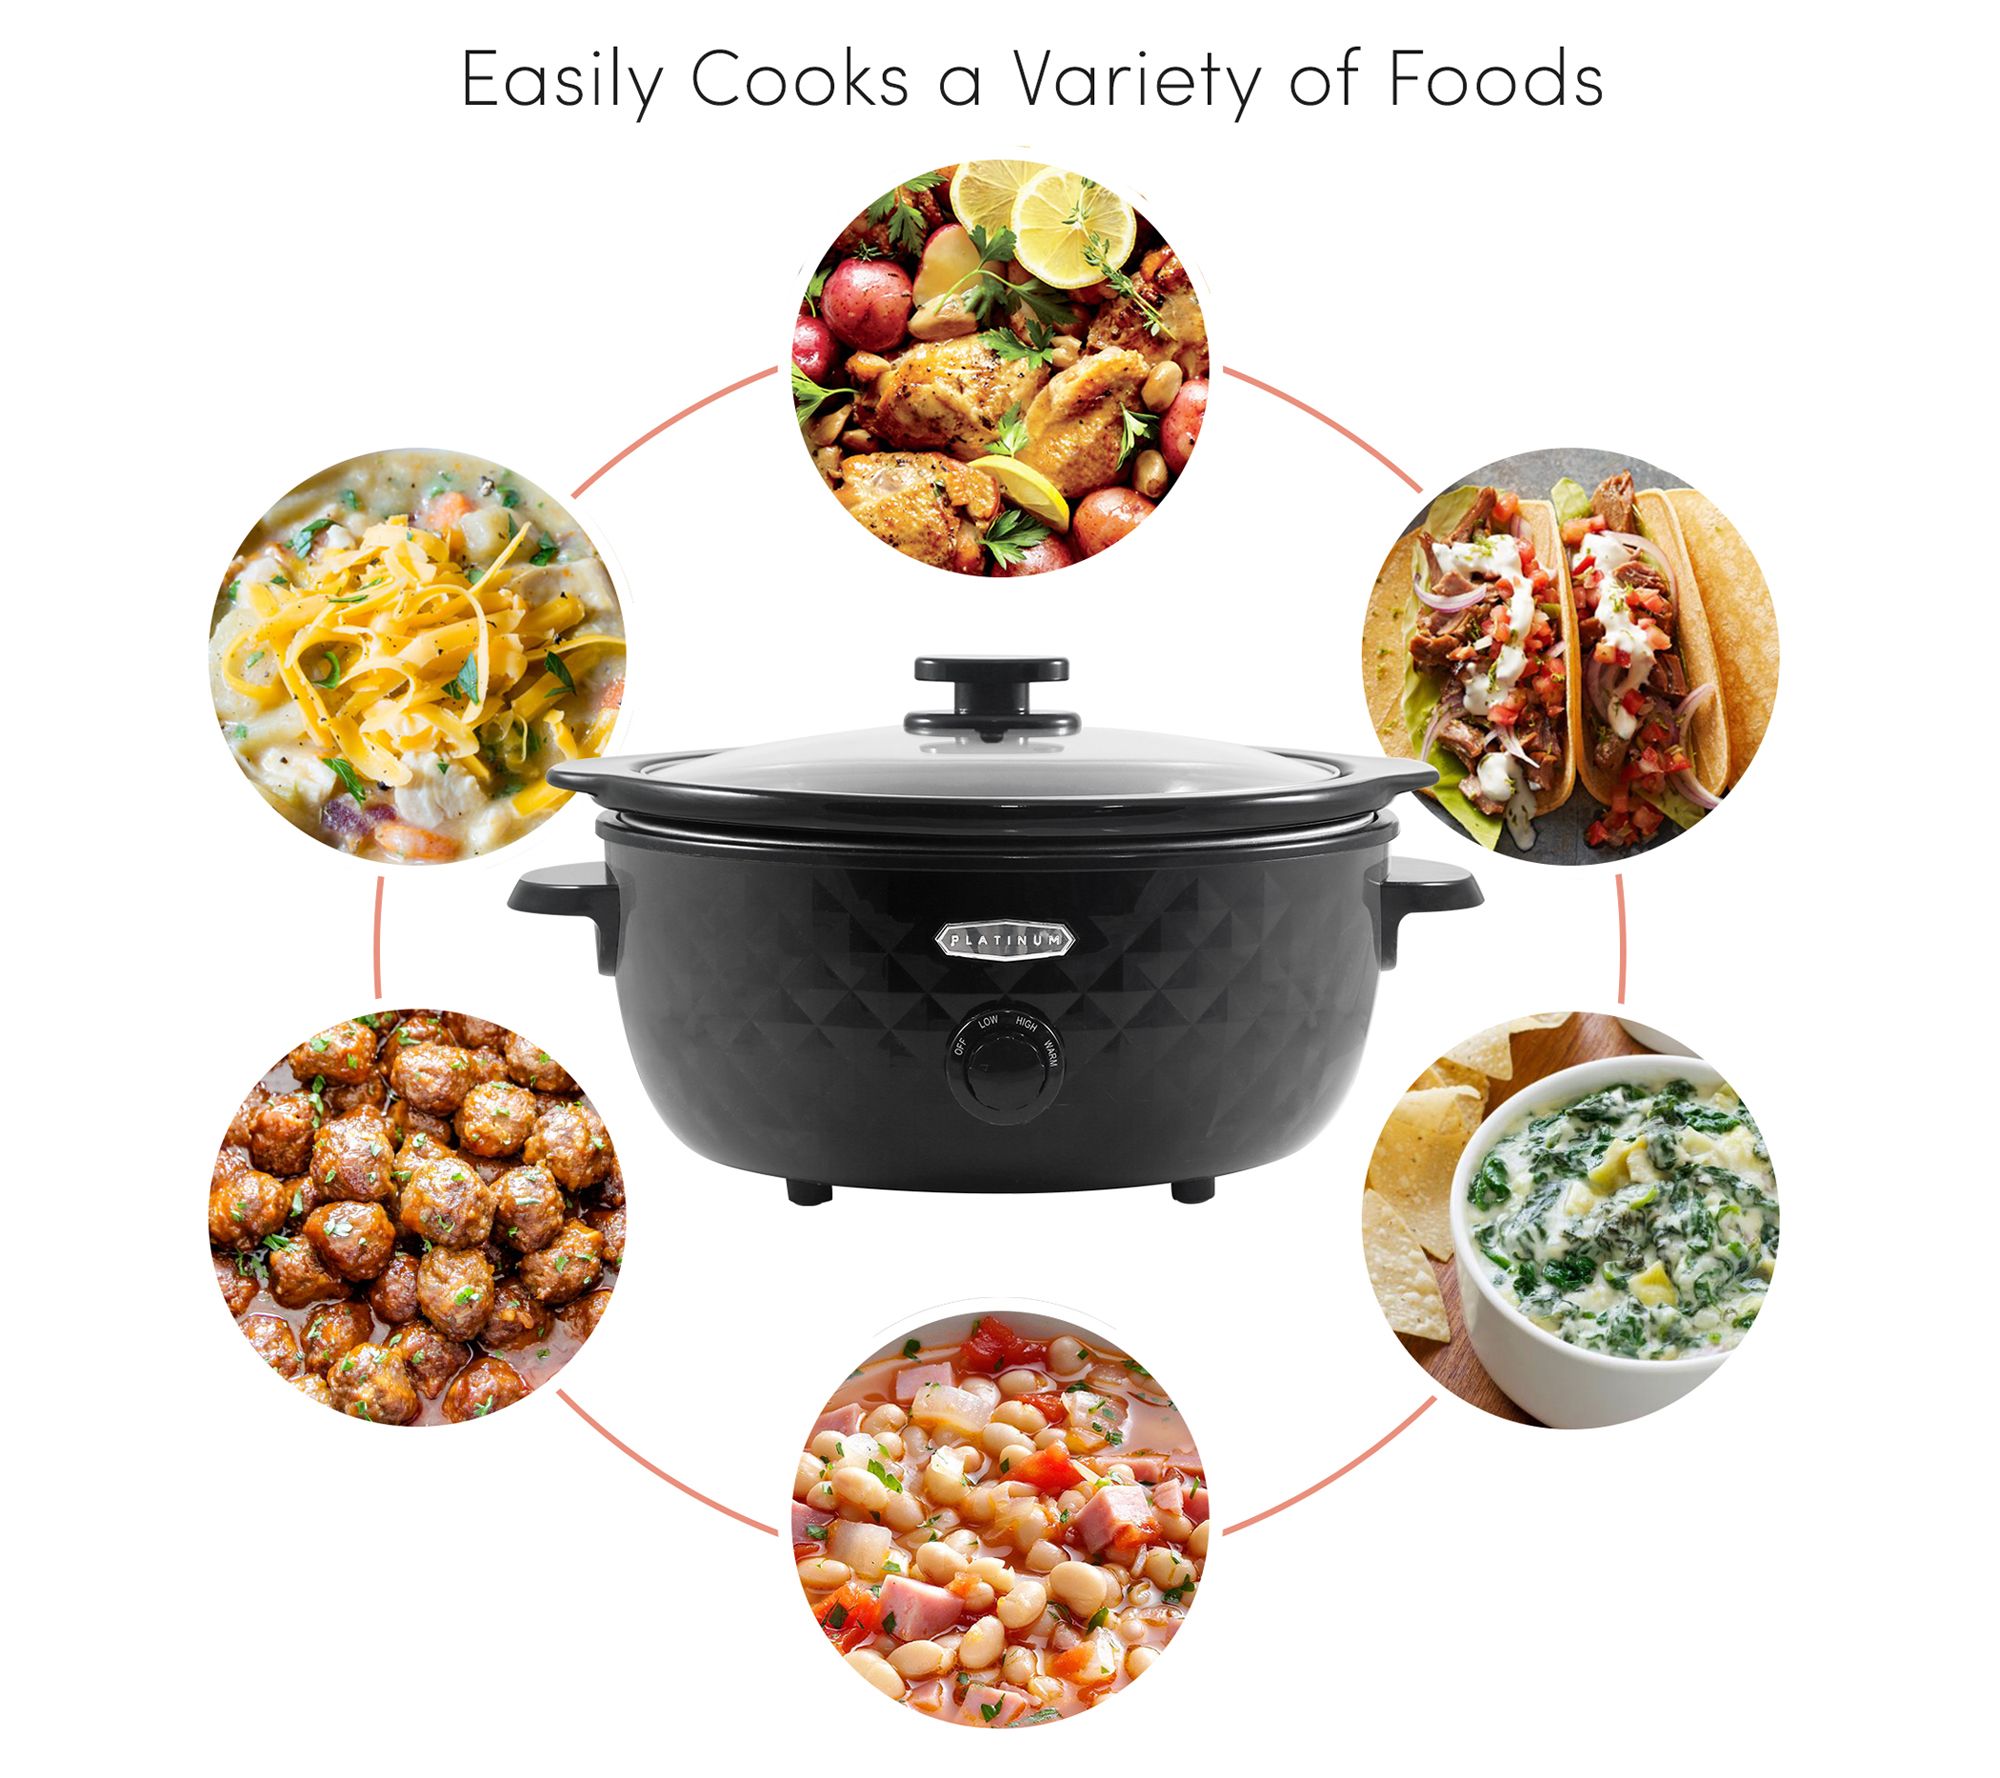 Courant 2.5-Quart Black Round Slow Cooker in the Slow Cookers